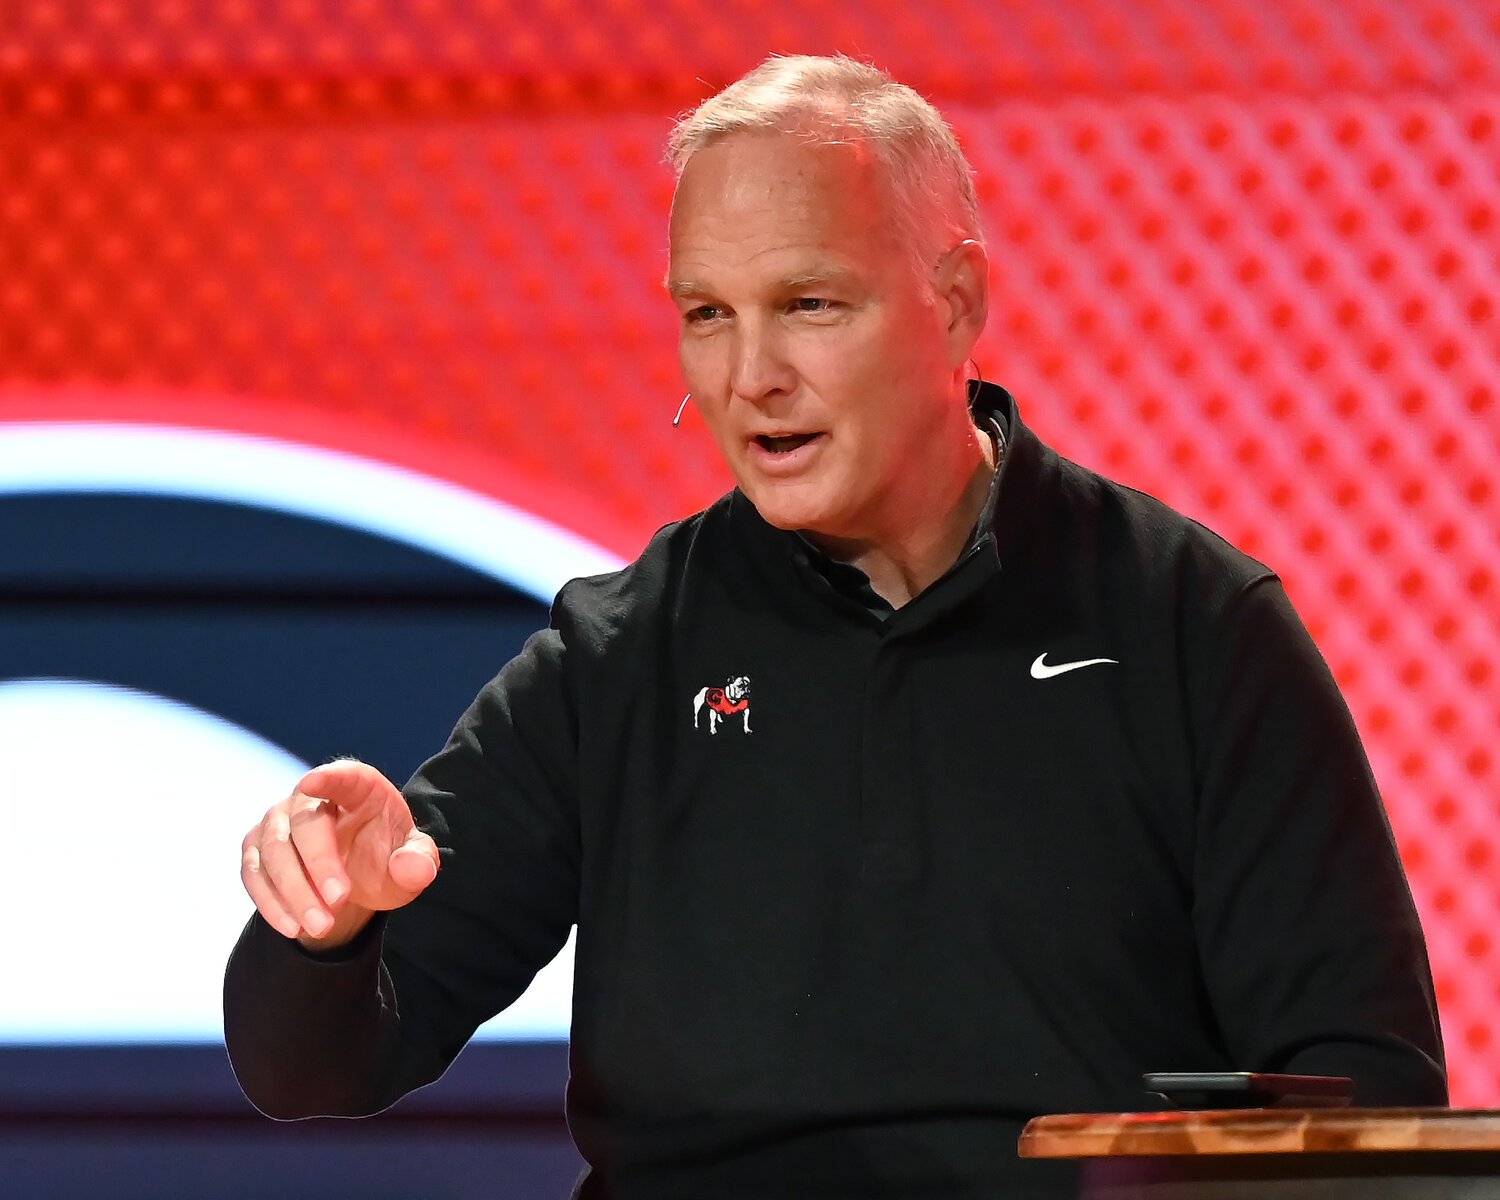 Former UGA football coach Mark Richt makes a point during the Fellowship of Christian Athletes UGA Night of Champions event on Friday at First Baptist Church of Woodstock. (Index/Henry Durand)